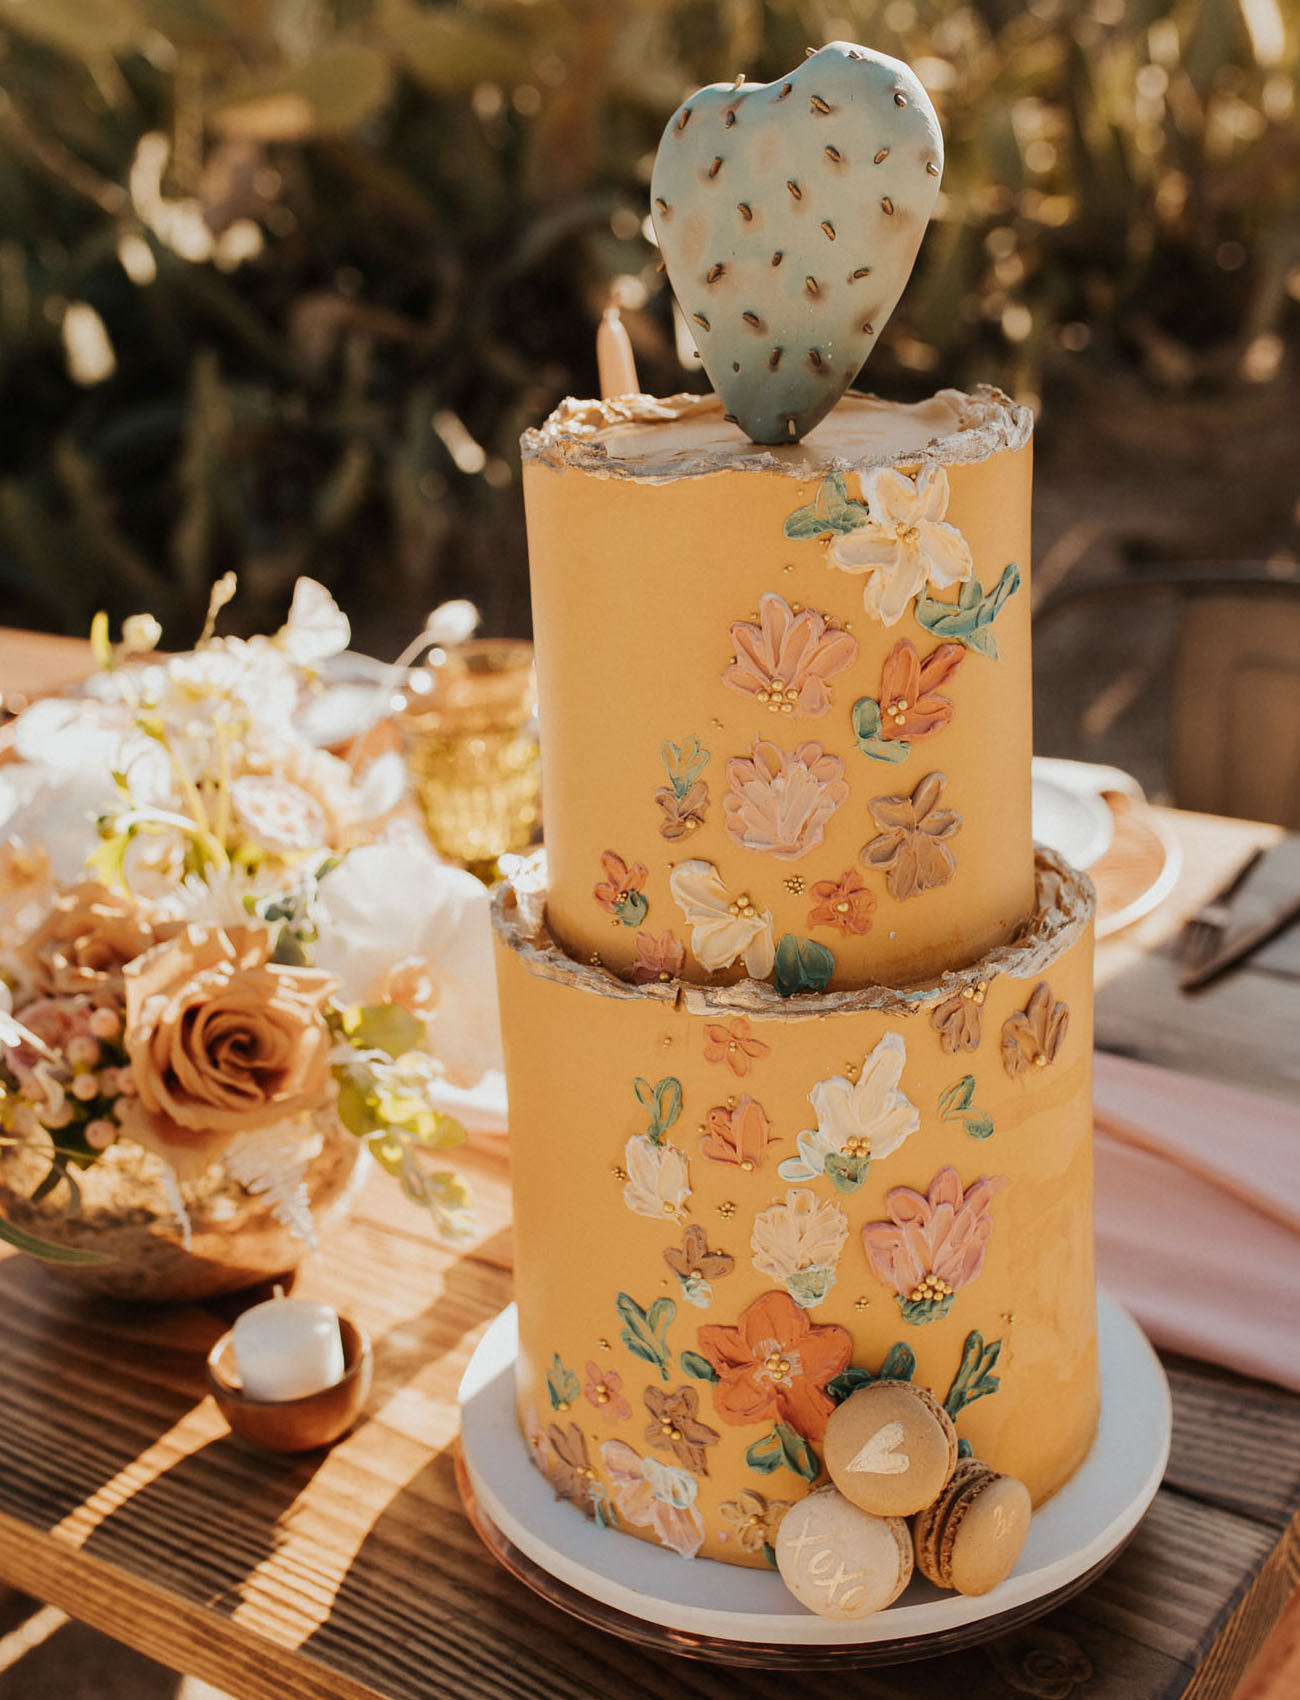 The wedding cake was a yellow one, with painted flowers and a cactus on top